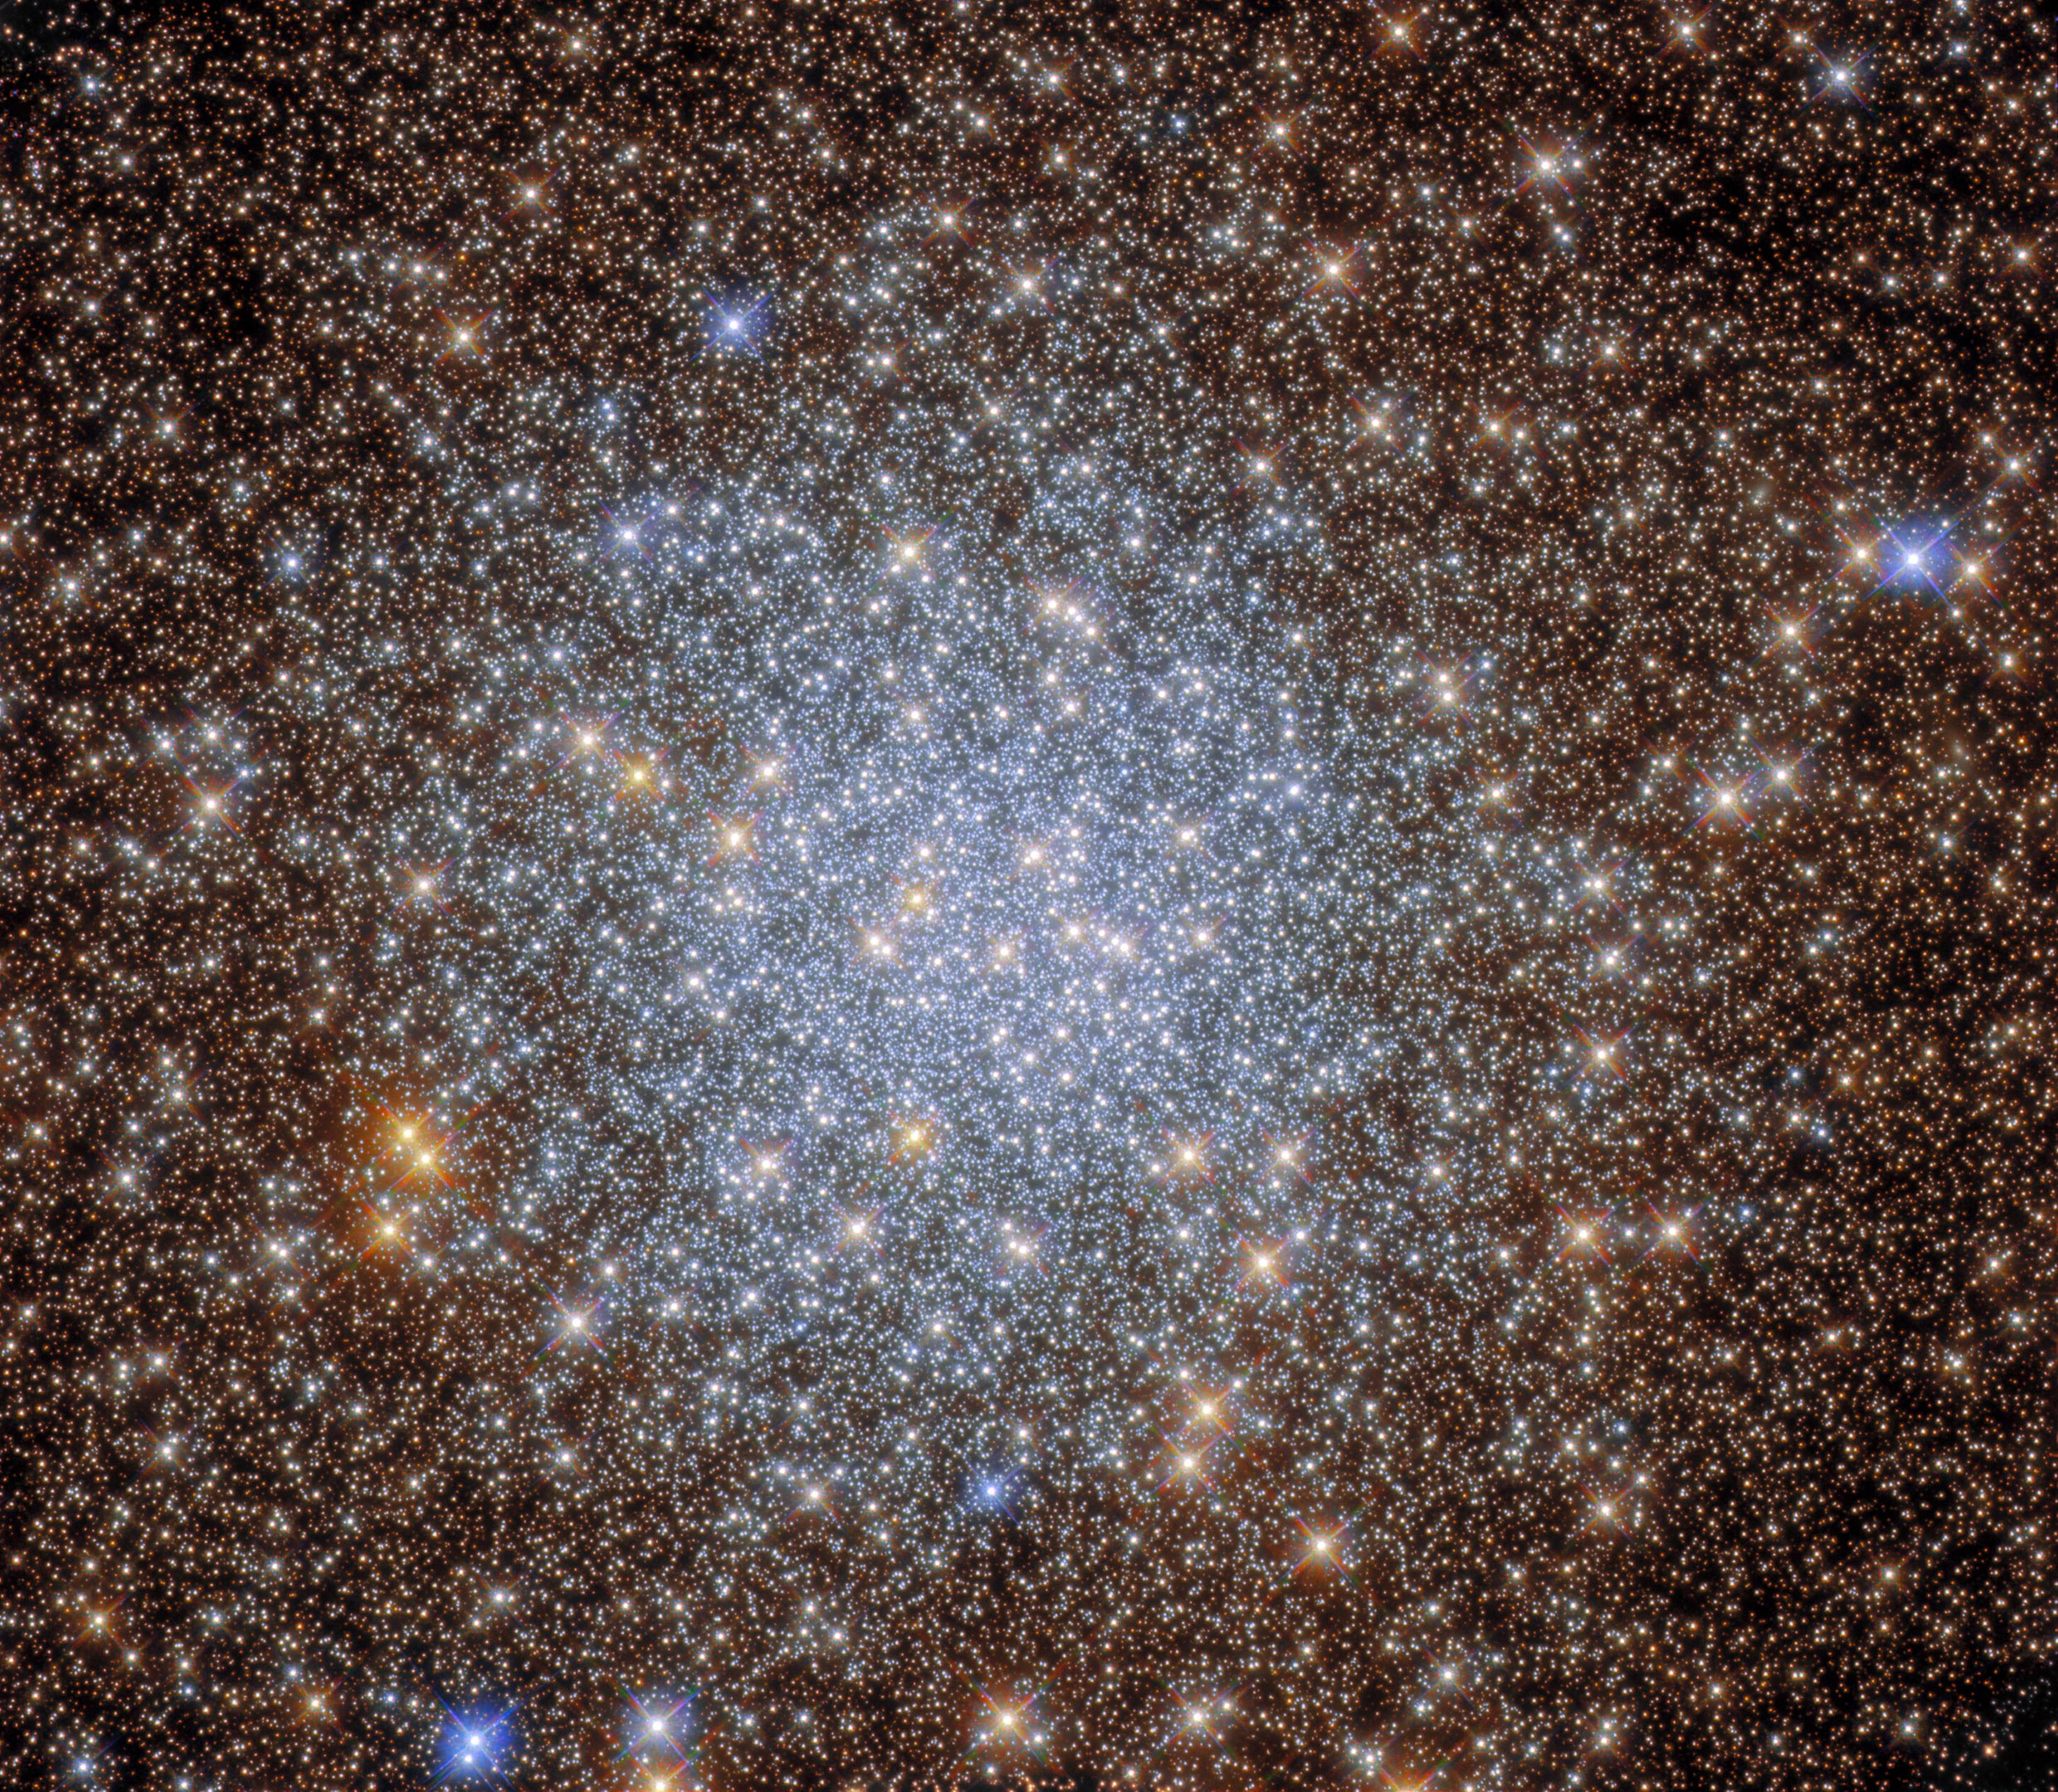 Hubble Captures a Glittering Hoard in an Astronomical Treasure Trove